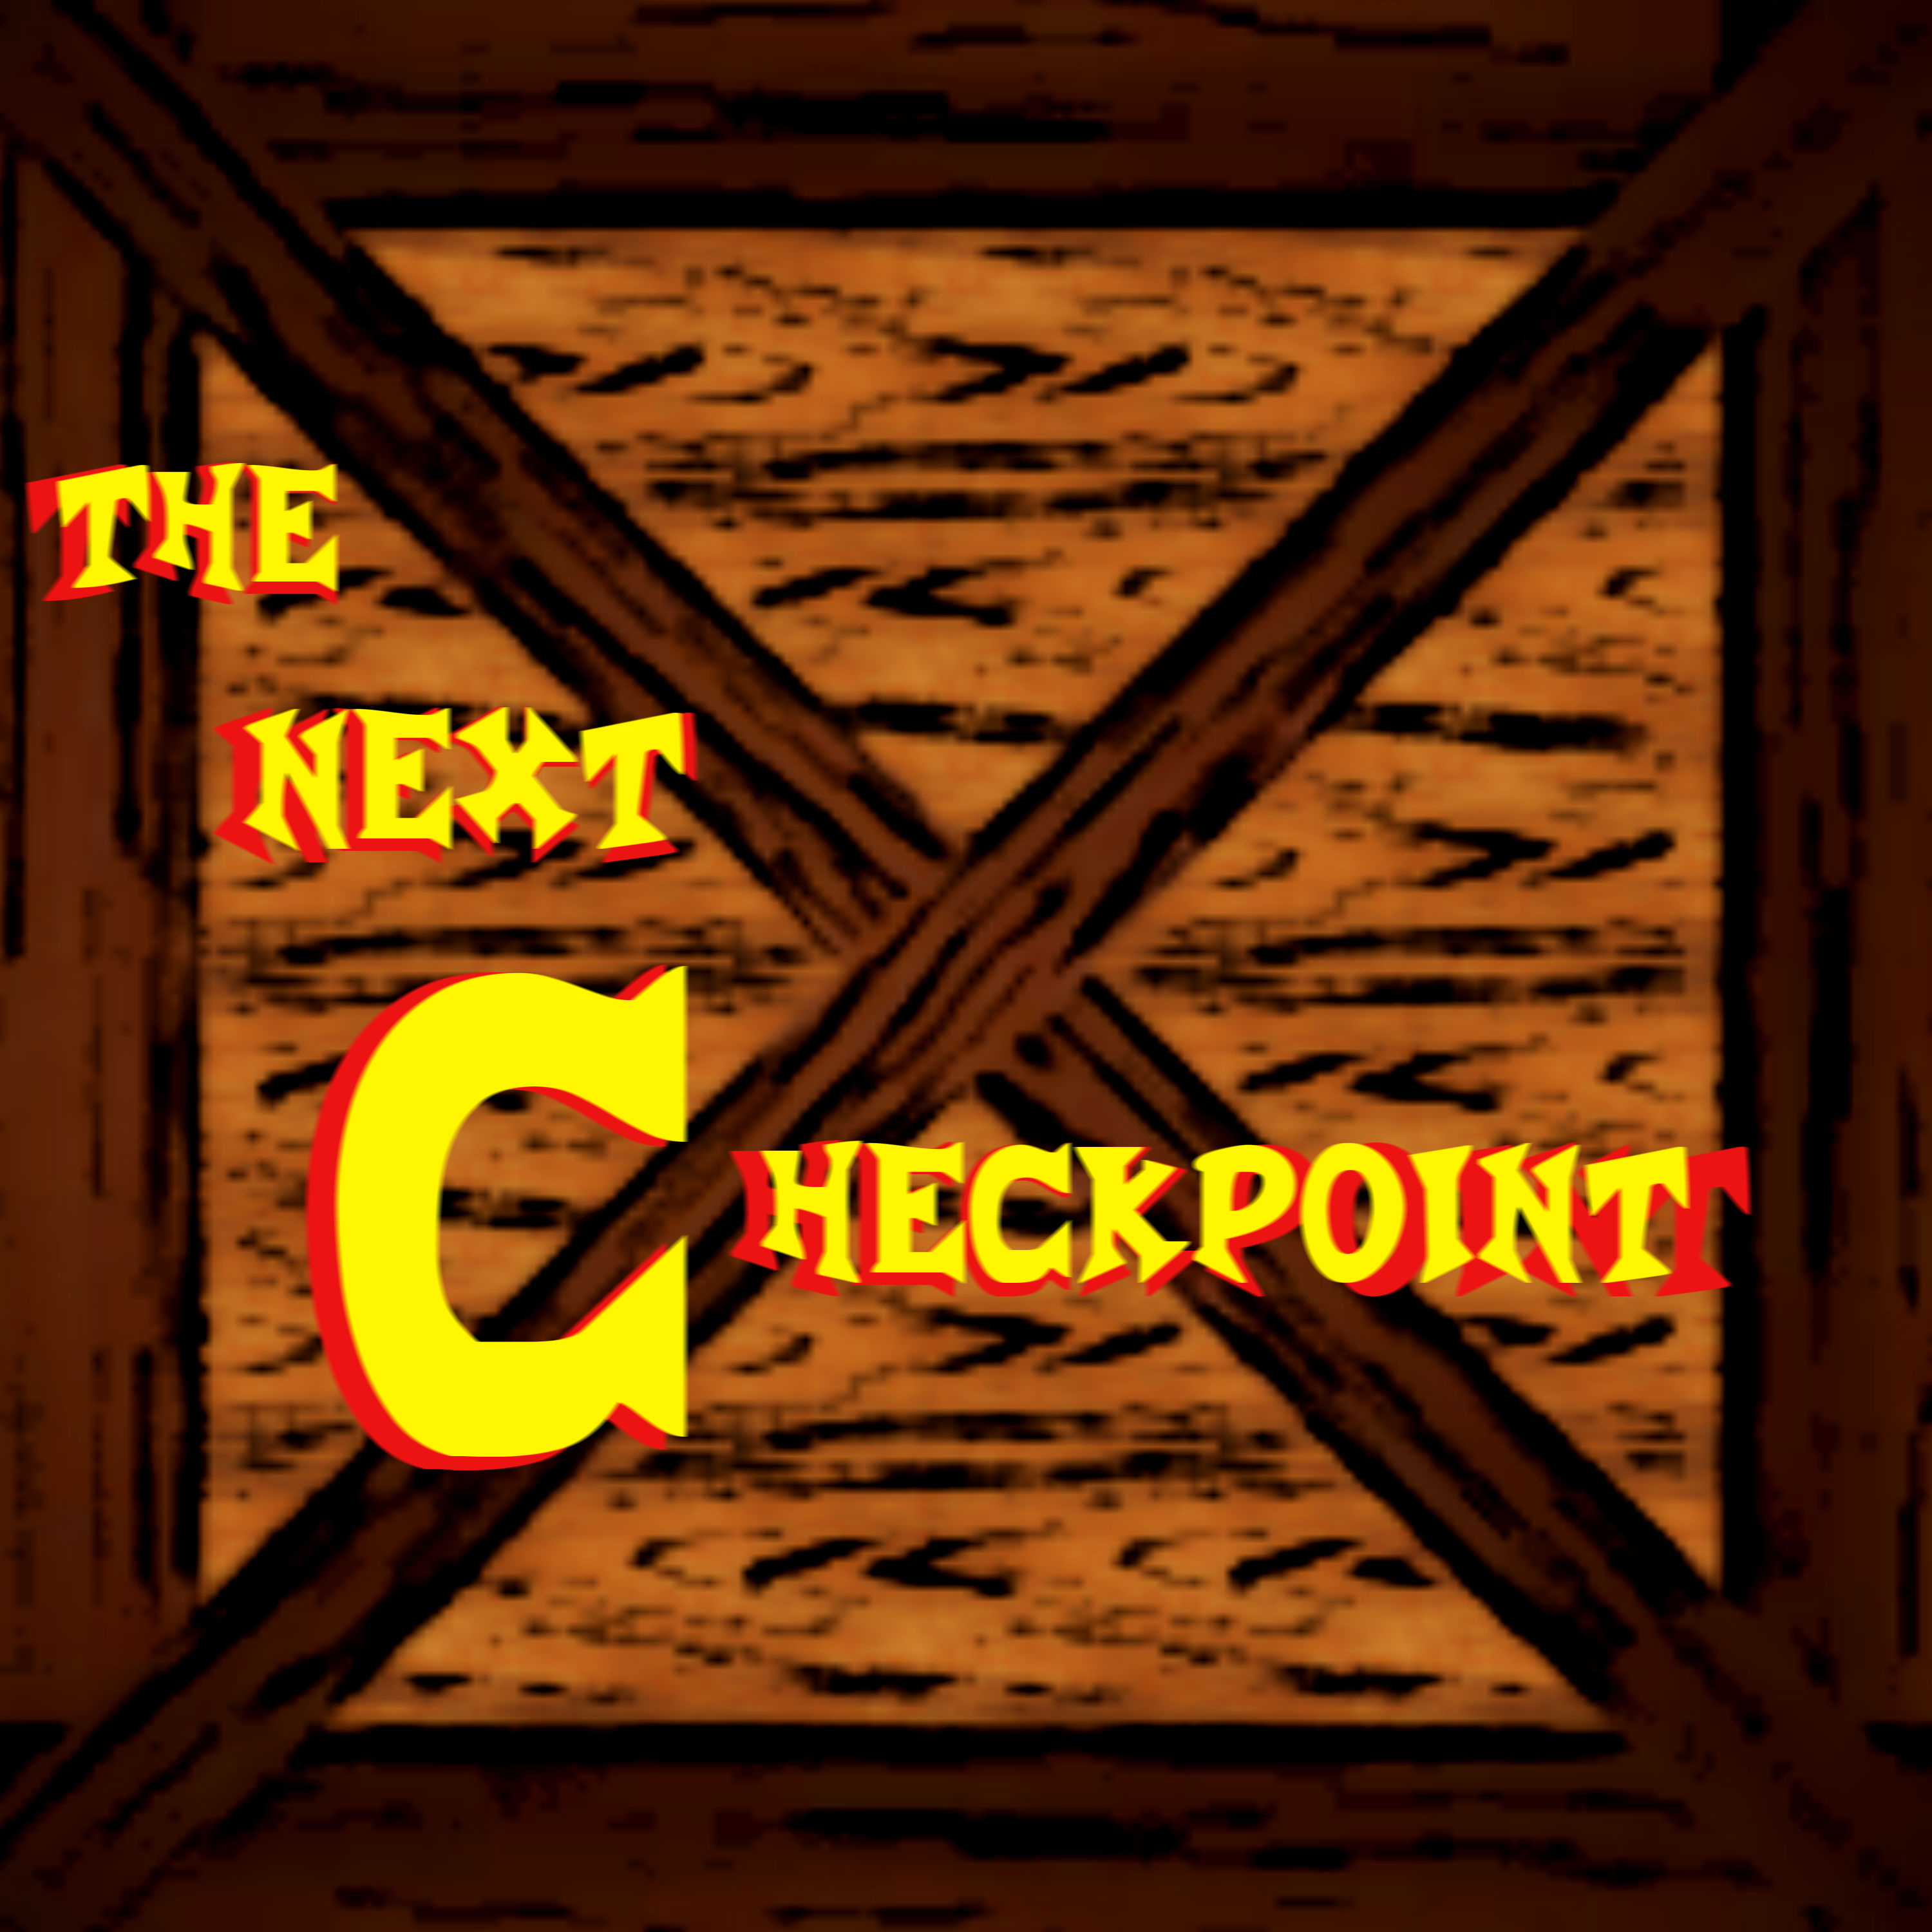 Next Checkpoint episode 7: WWE 2K20 predictions with Daniel